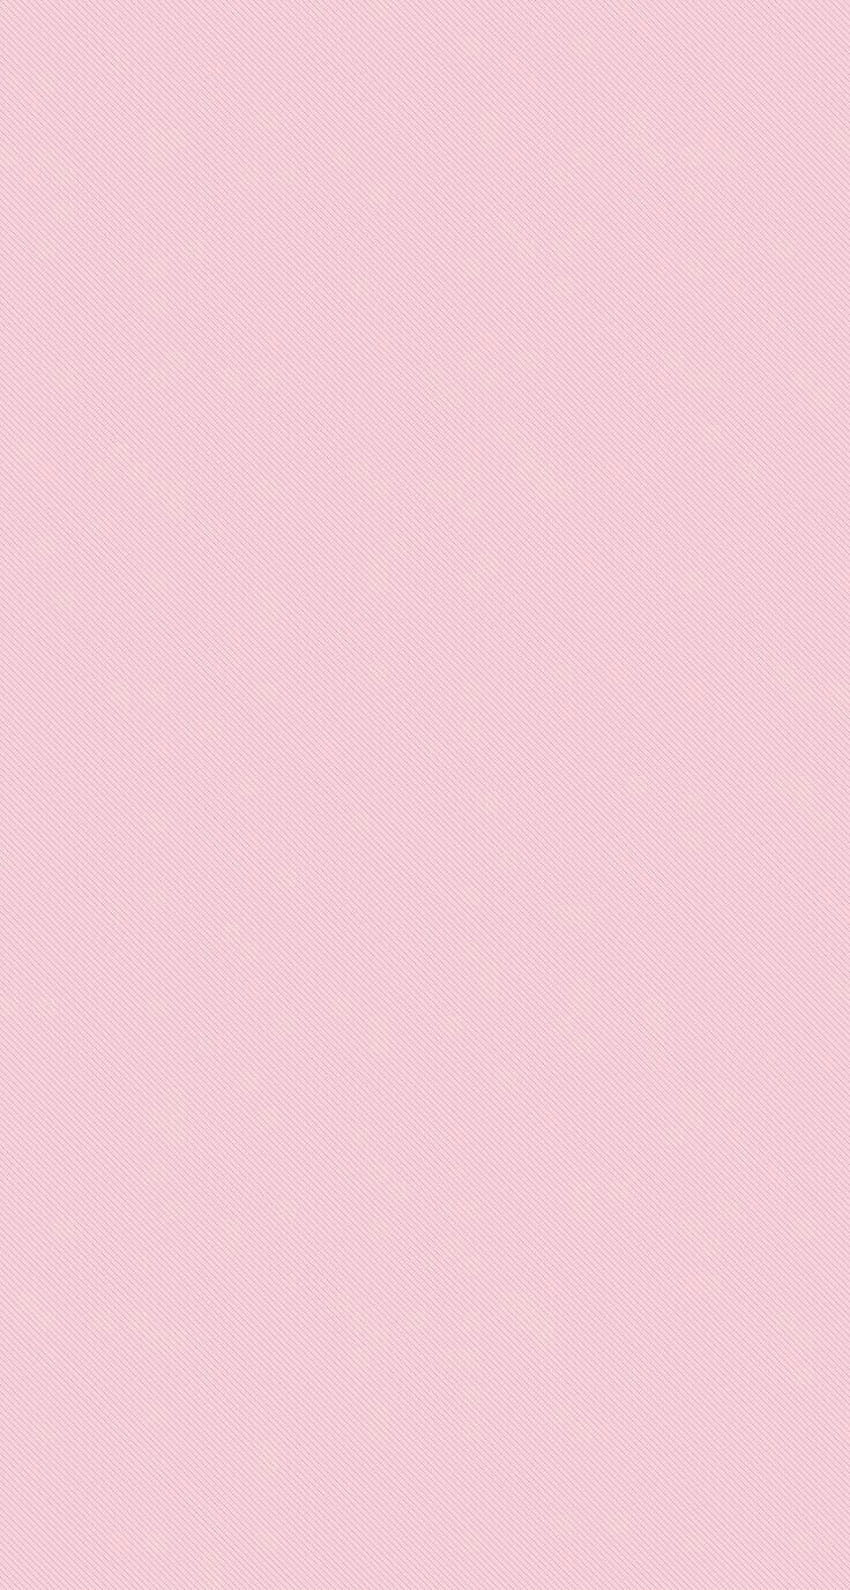 T i f f a n y T r u e l o v on . Pastel color , Color iphone, Pastel pink, Solid Gray Pastel HD phone wallpaper